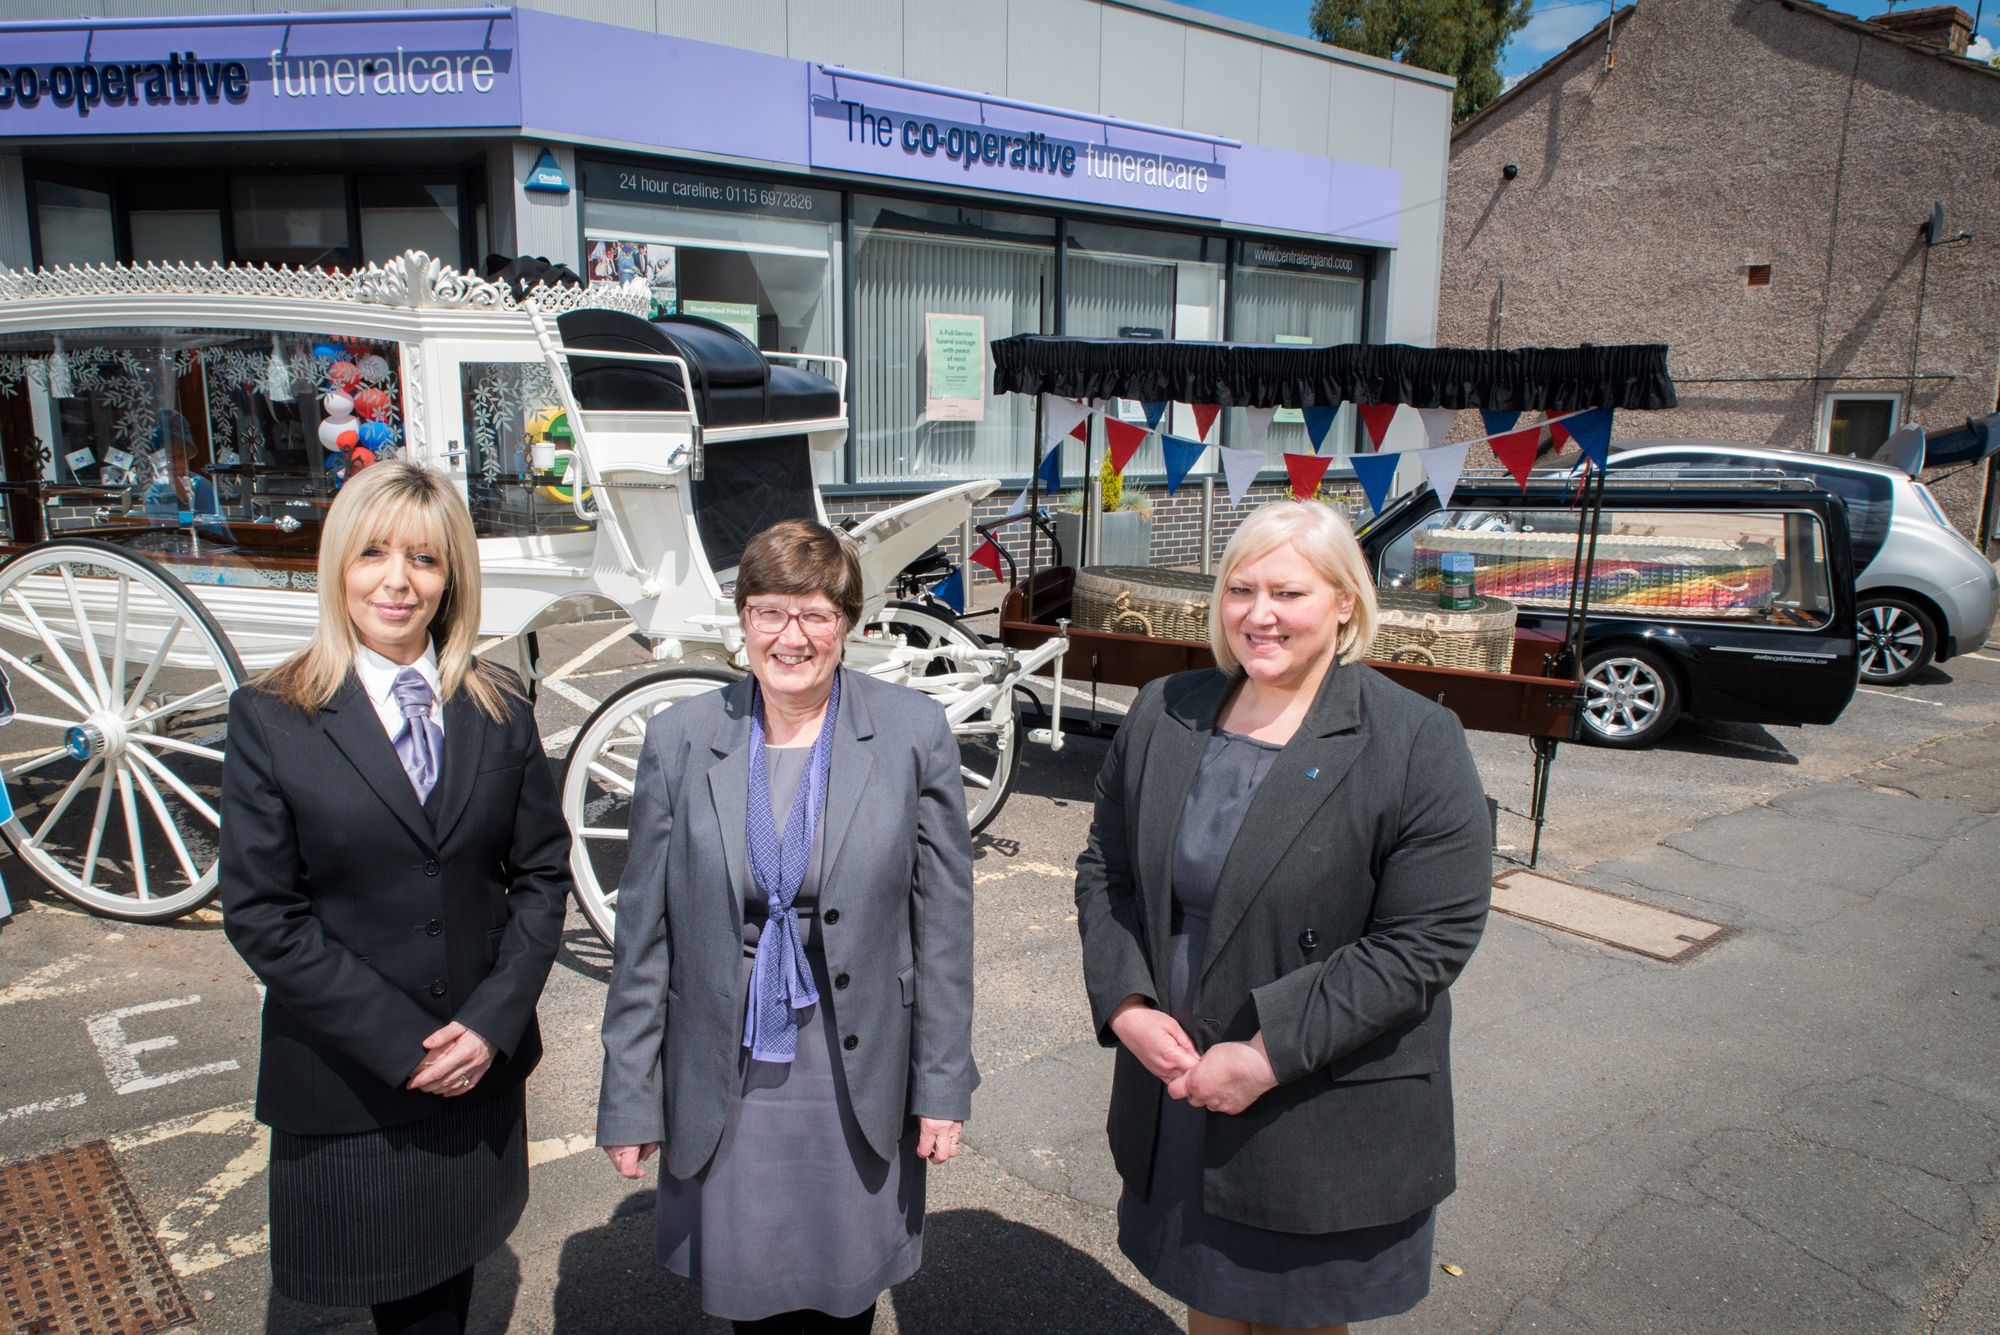 Central England Co-op Funeralcare opens the doors to the community in Nottingham